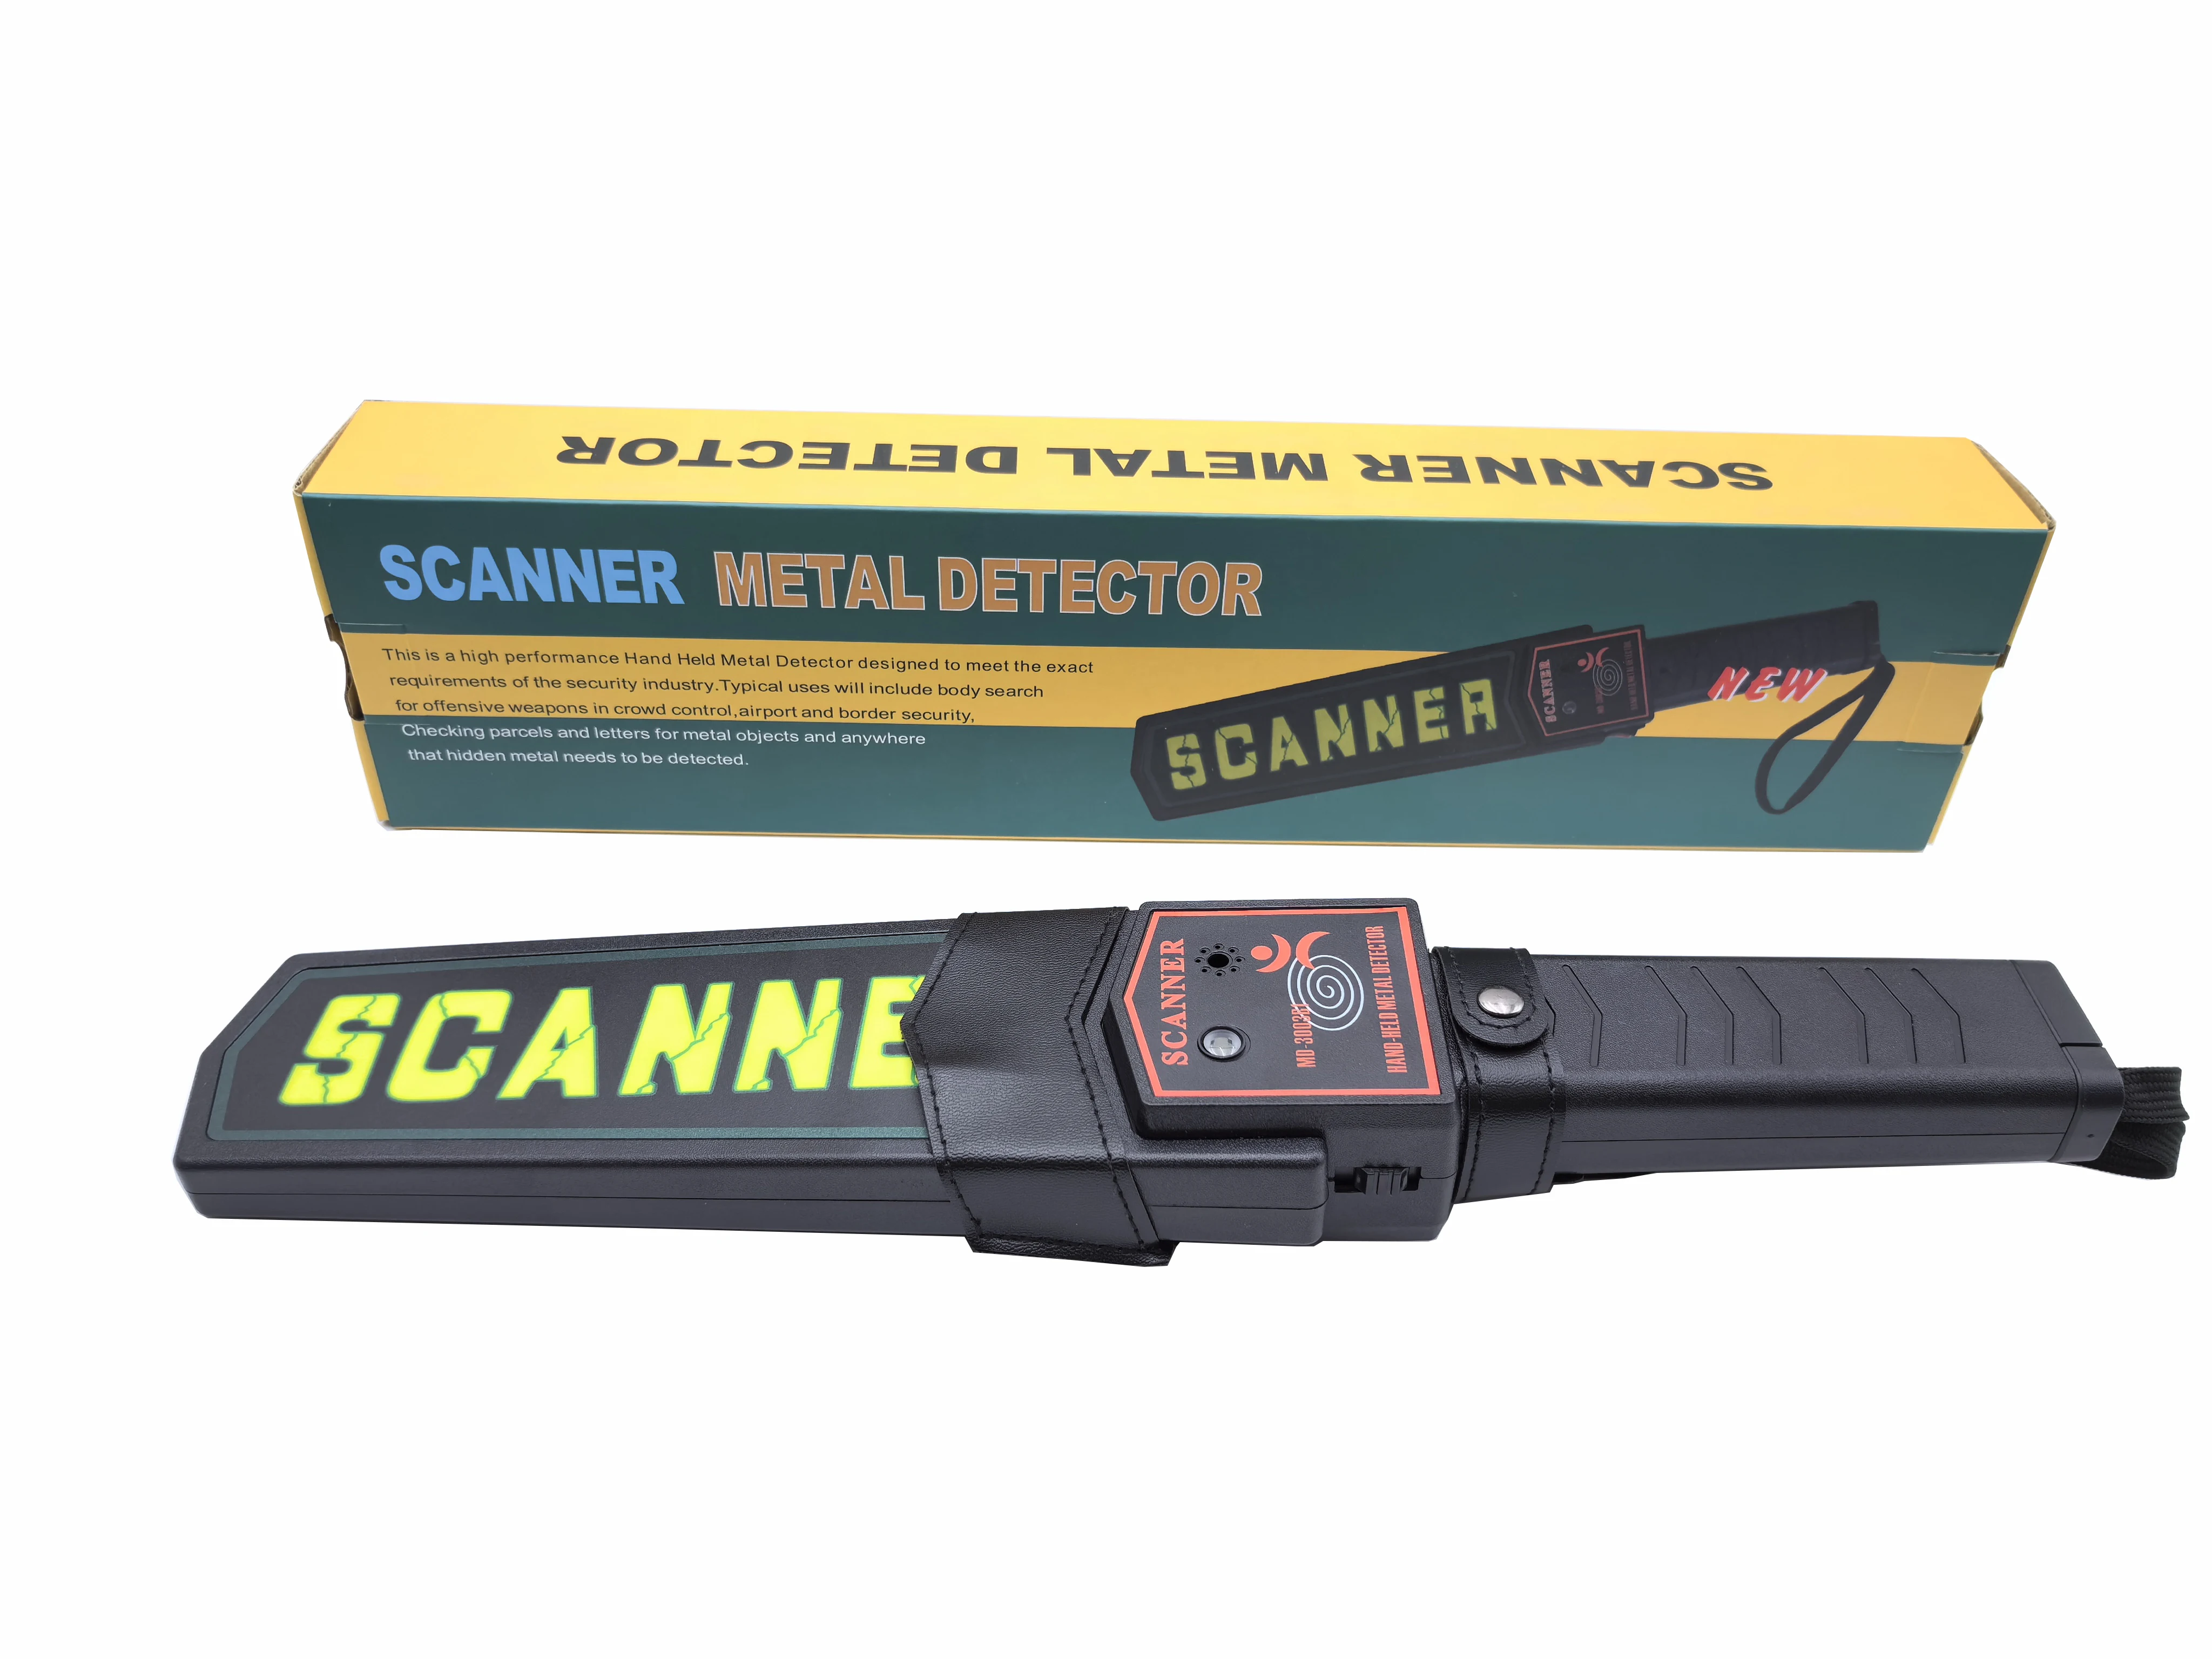 Good quality MD-3003B1 Security Wand Handy Scanner Full Body Hand Held Security Metal Detector images - 6